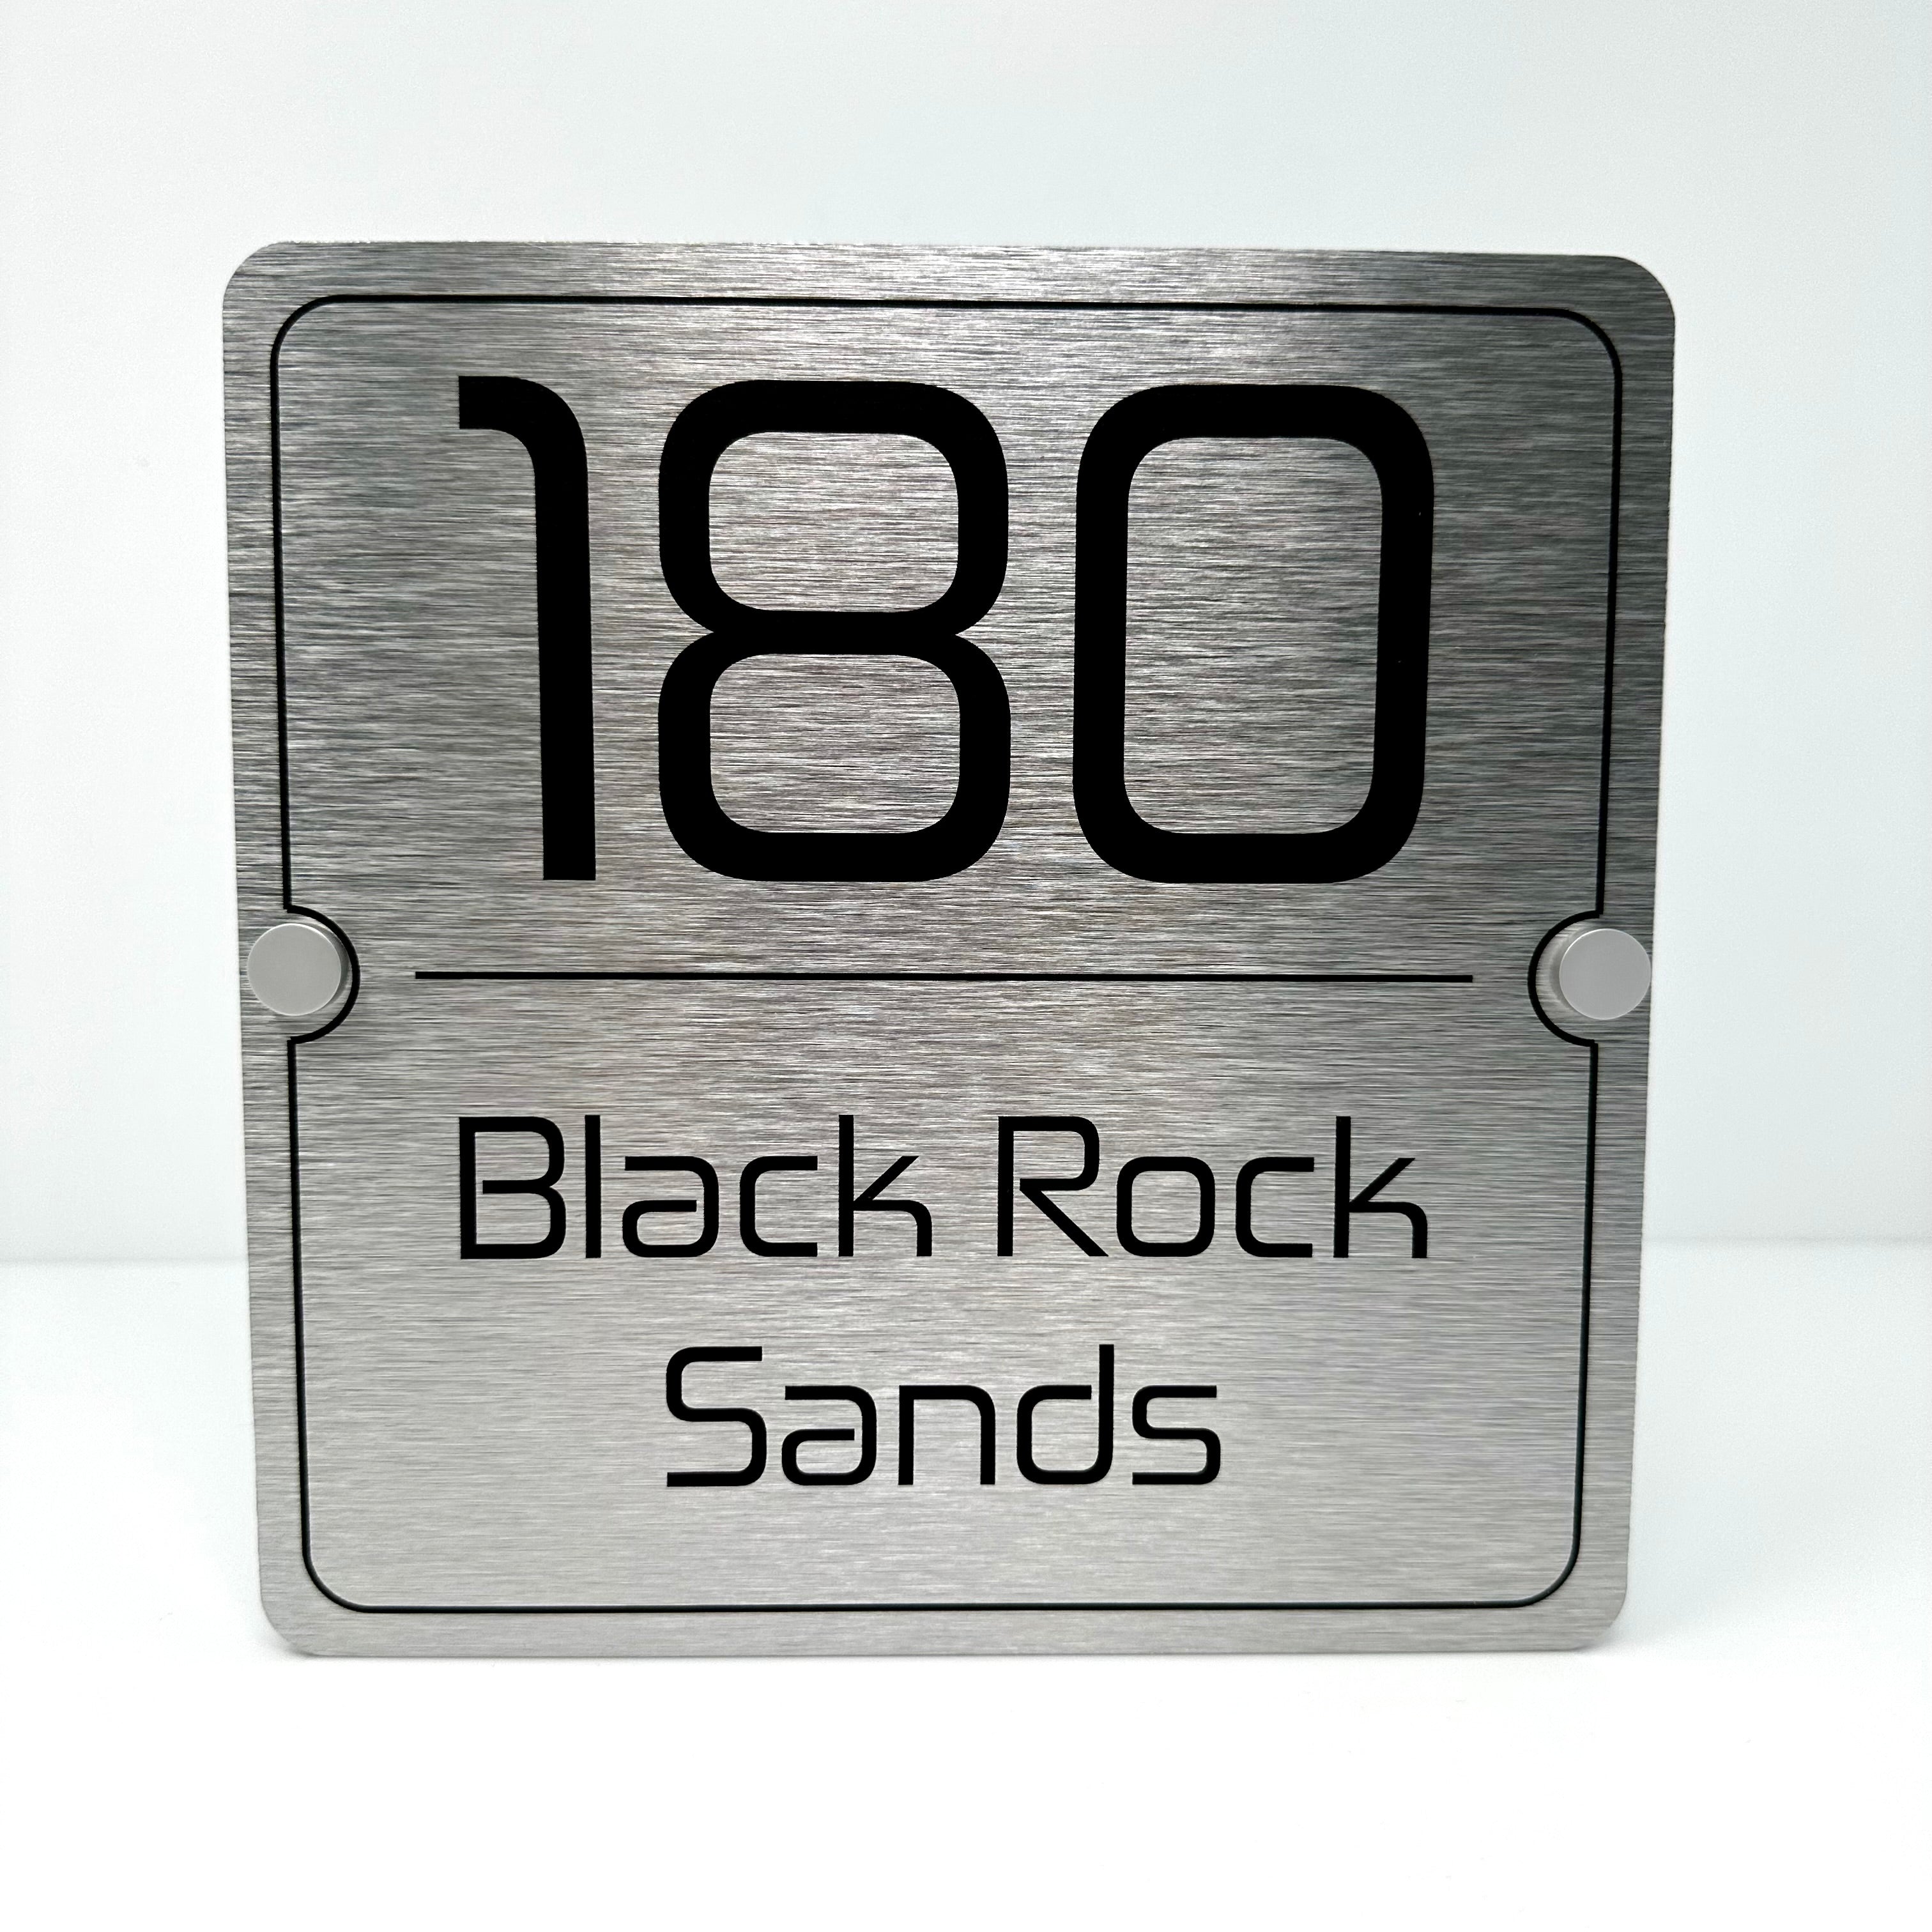 The Black Rock Sands Modern House Sign with a Brushed Silver Panel and Satin Silver Stand Off Fixings ( Size - 20cm x 20cm )